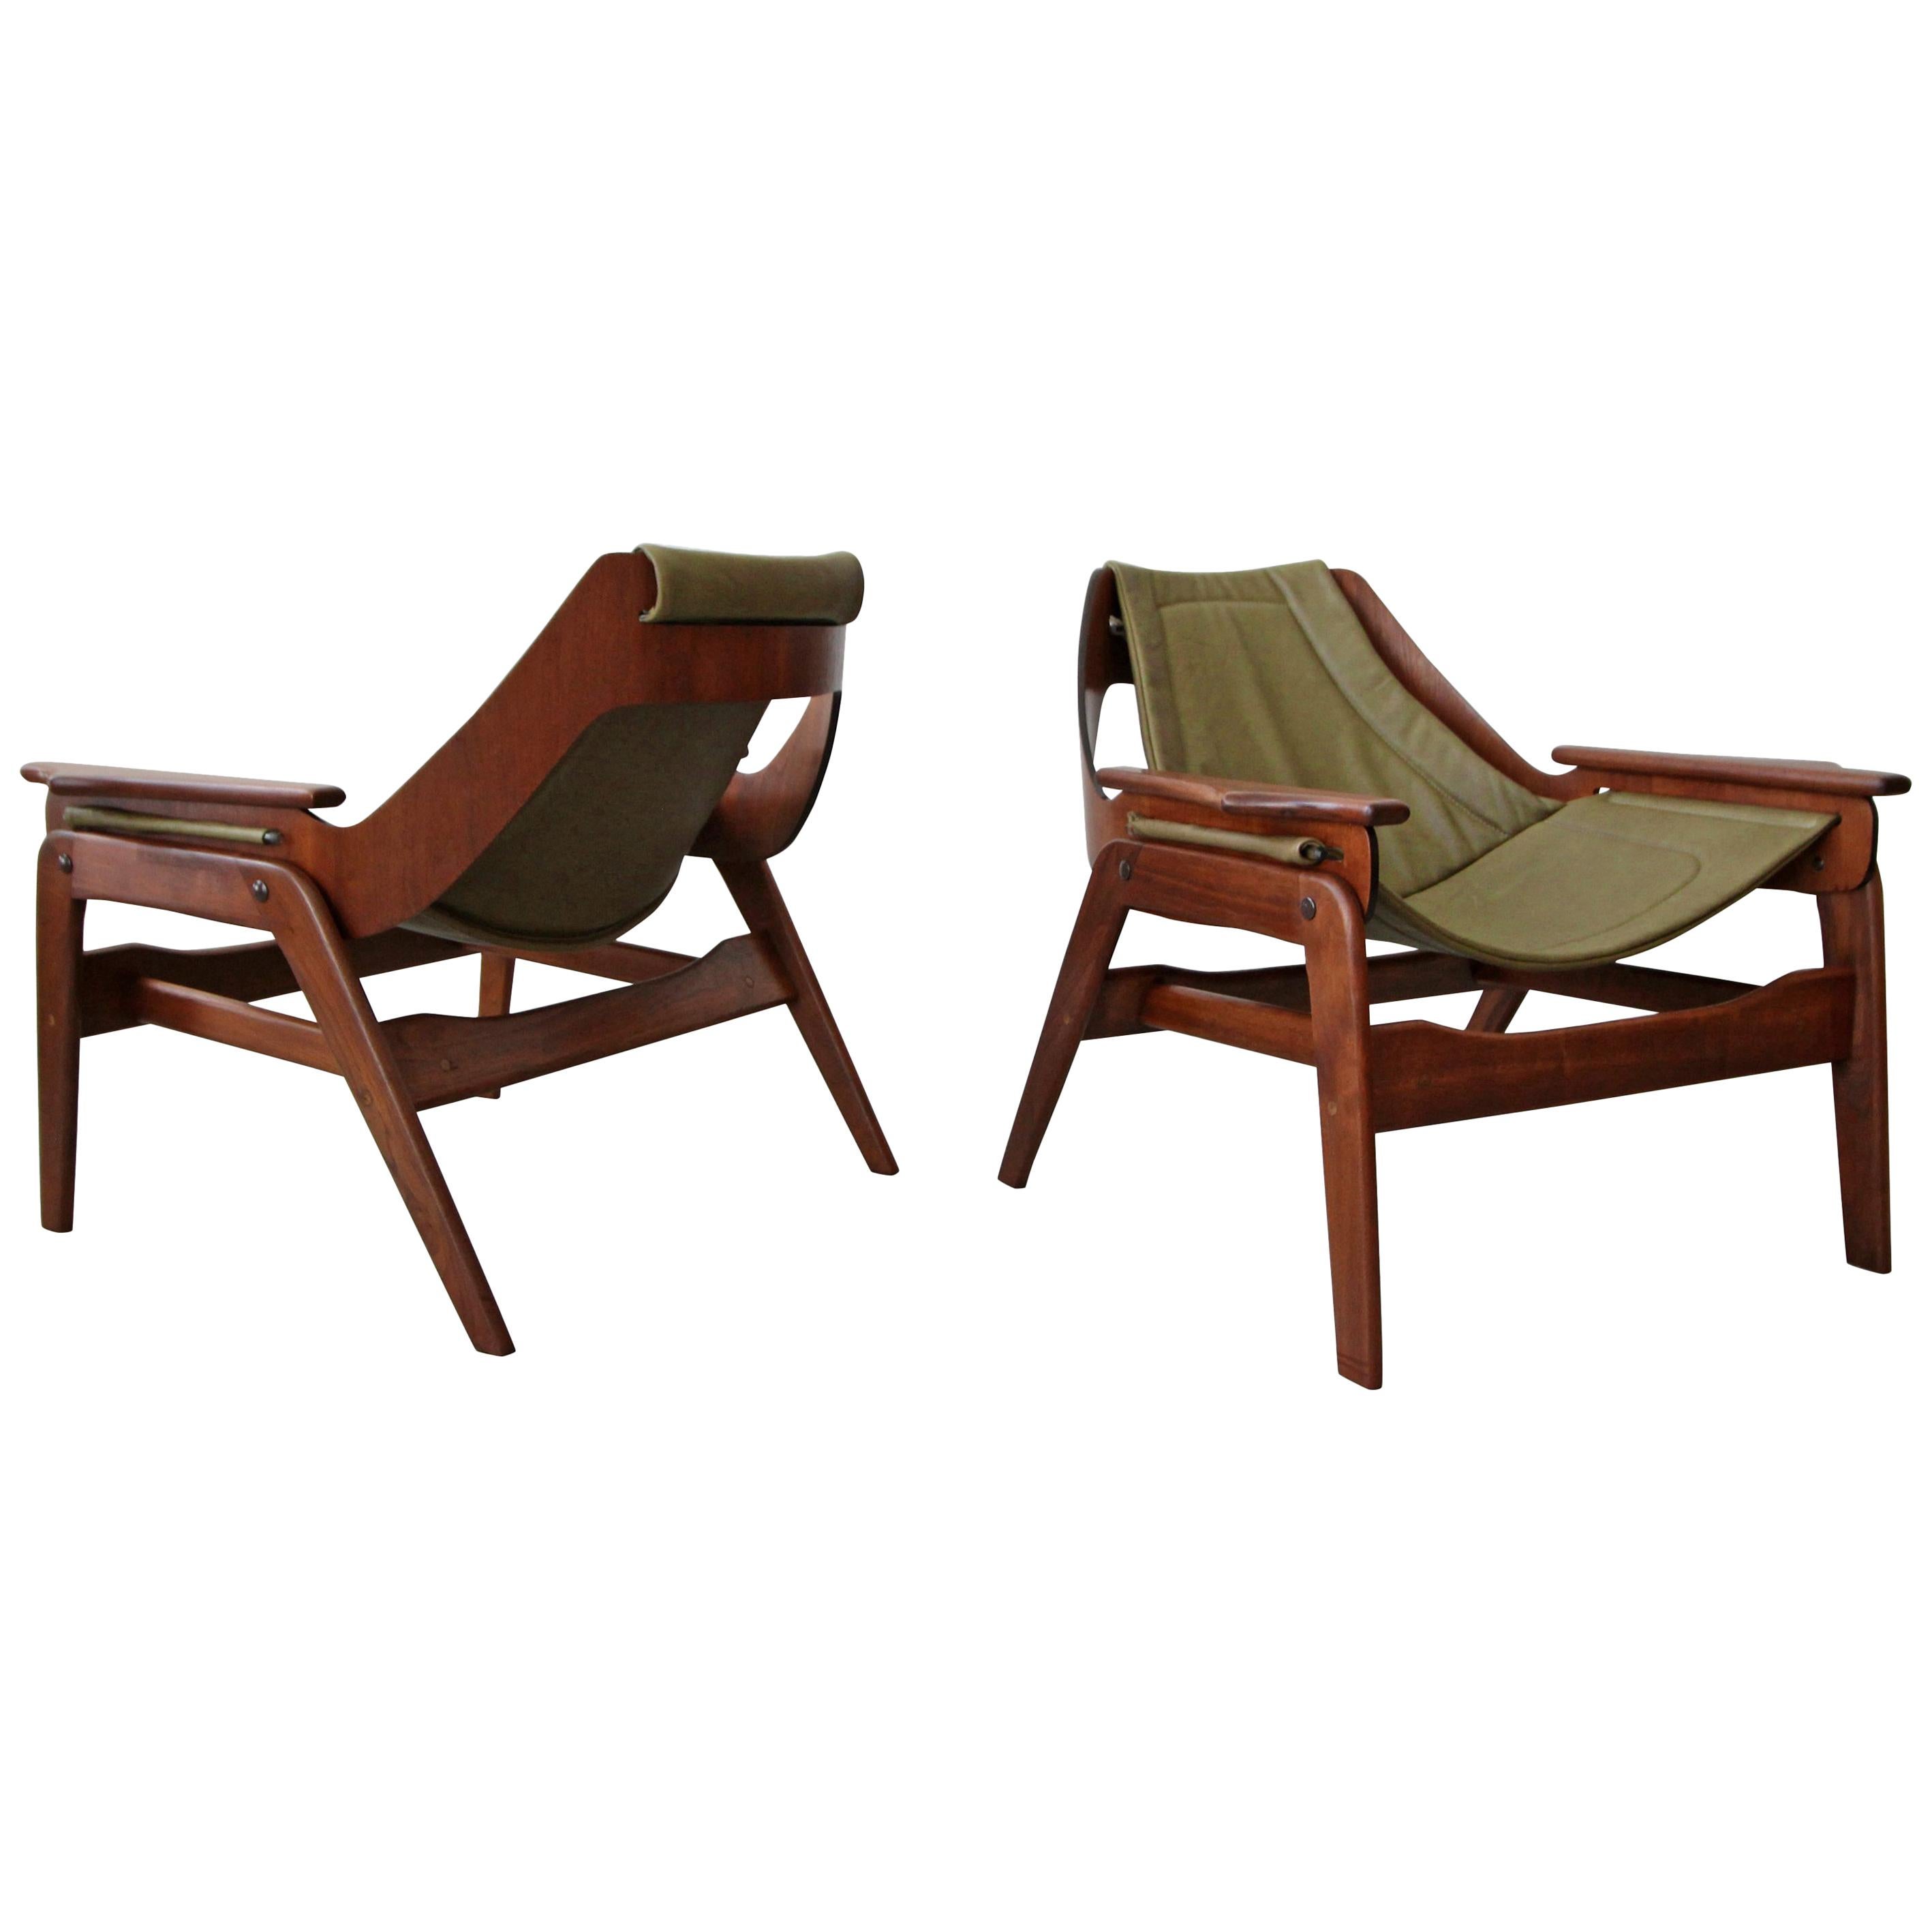 Pair of Midcentury Leather and Walnut Sling Chairs by Jerry Johnson